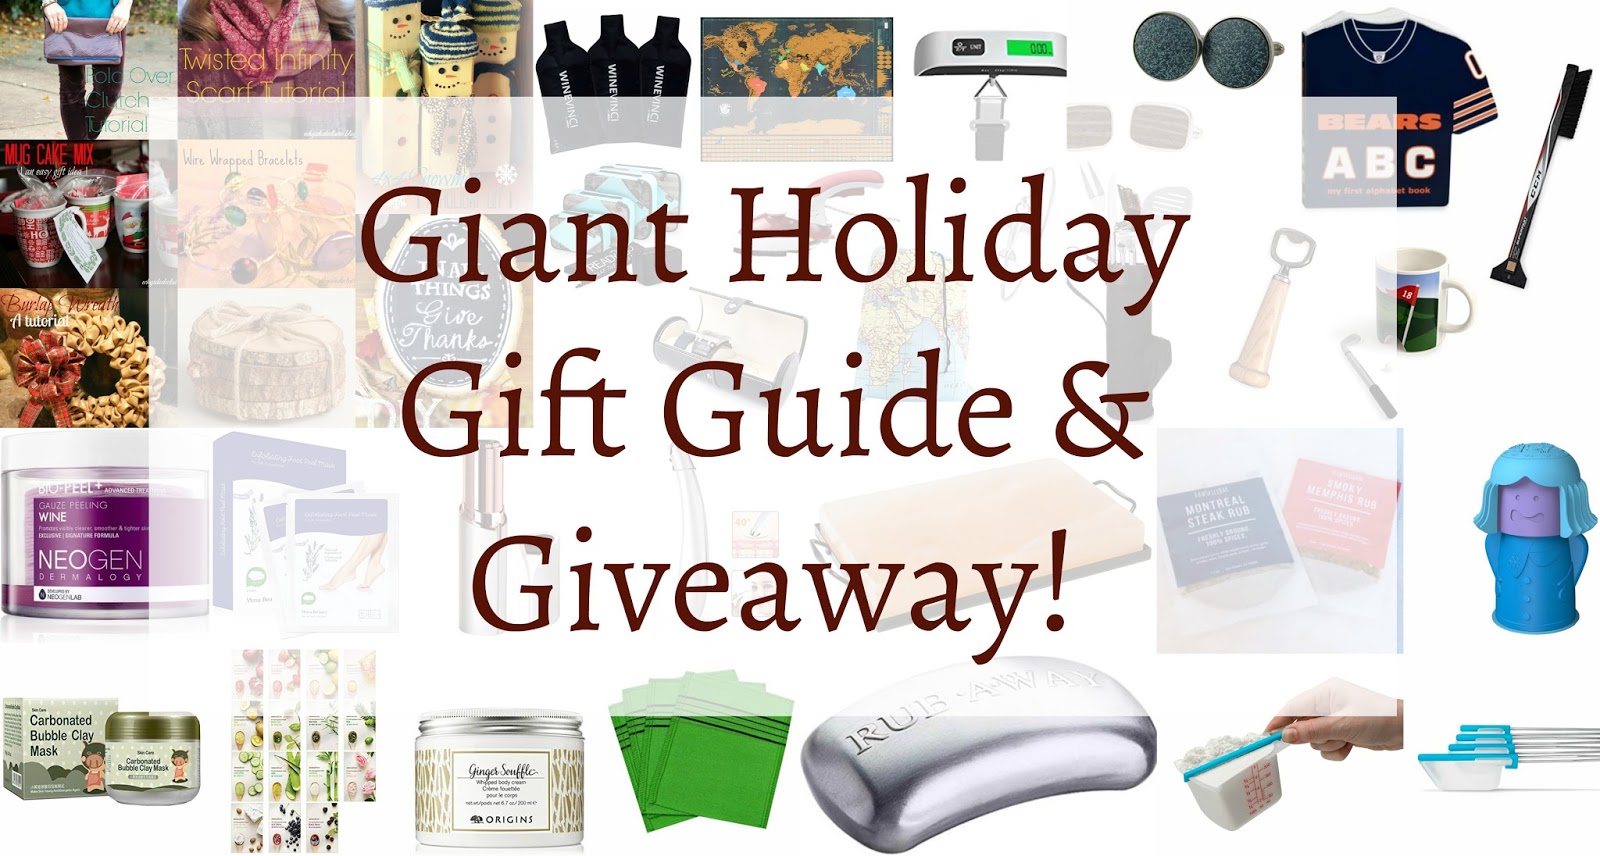 Giant Holiday Gift Guide & Giveaway & Confident Twosday Linkup